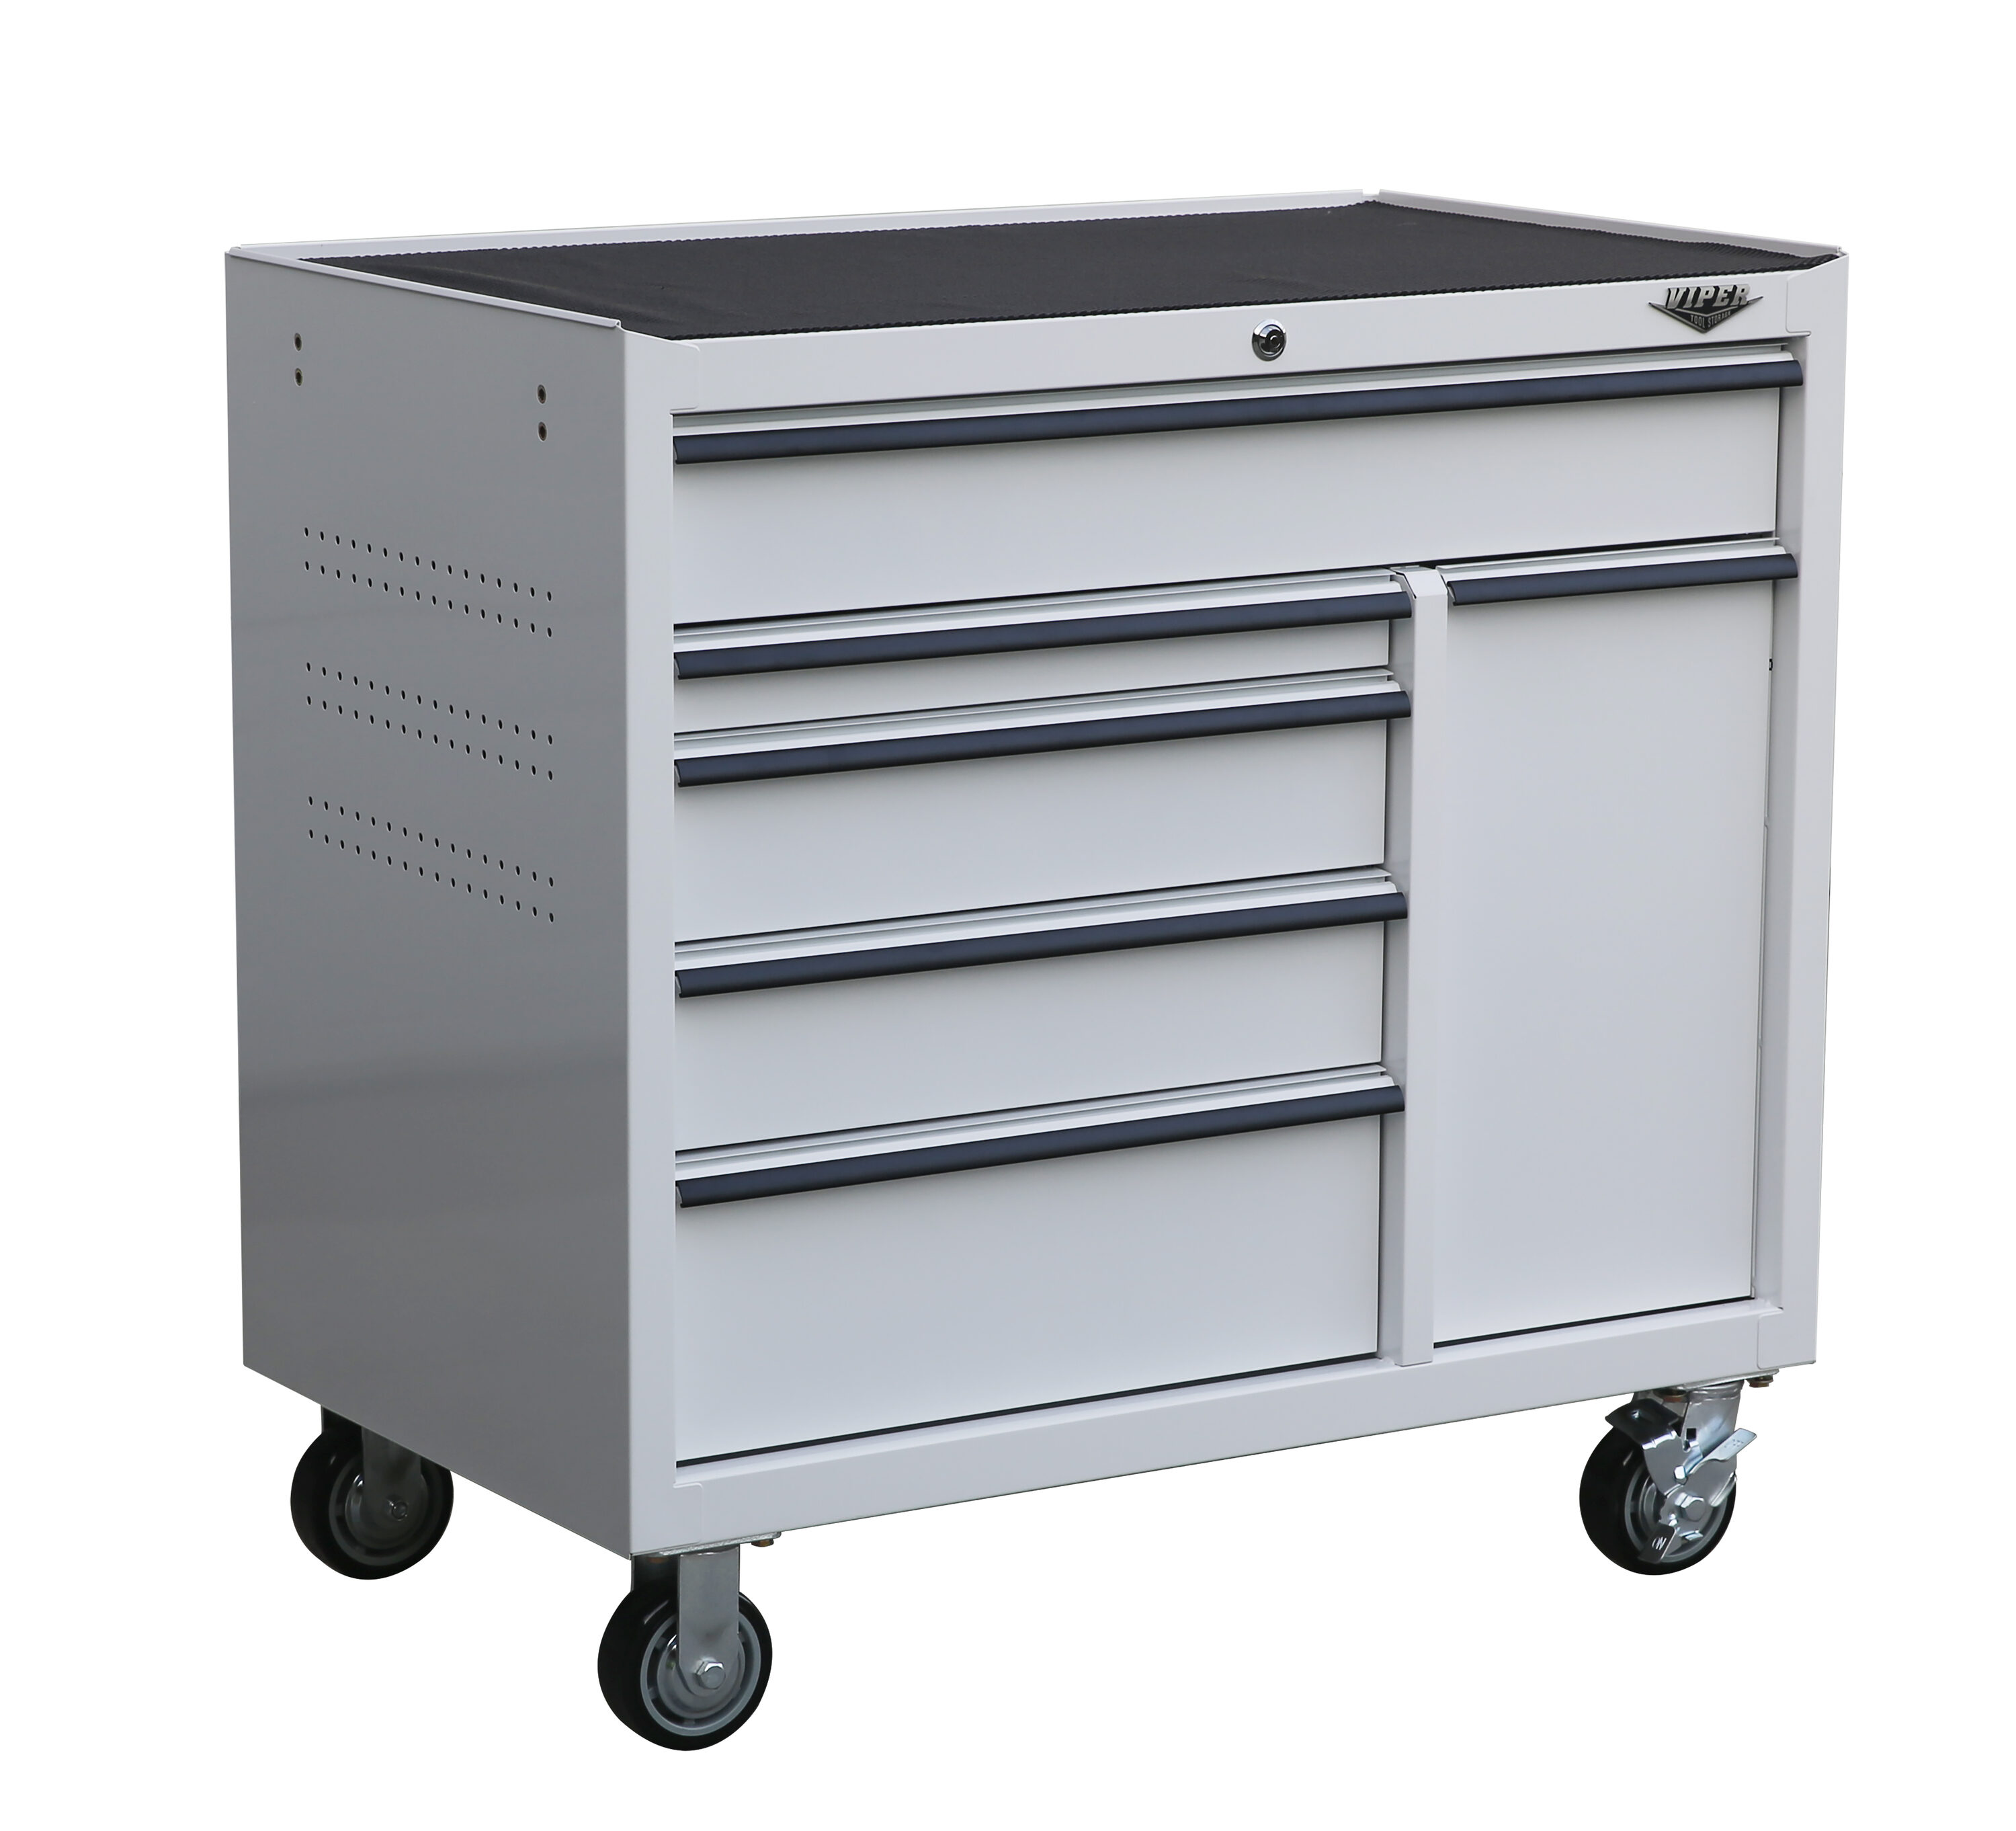 5-Drawer Rolling Tool Chest Tool Storage Cabinet Tool Box Sale